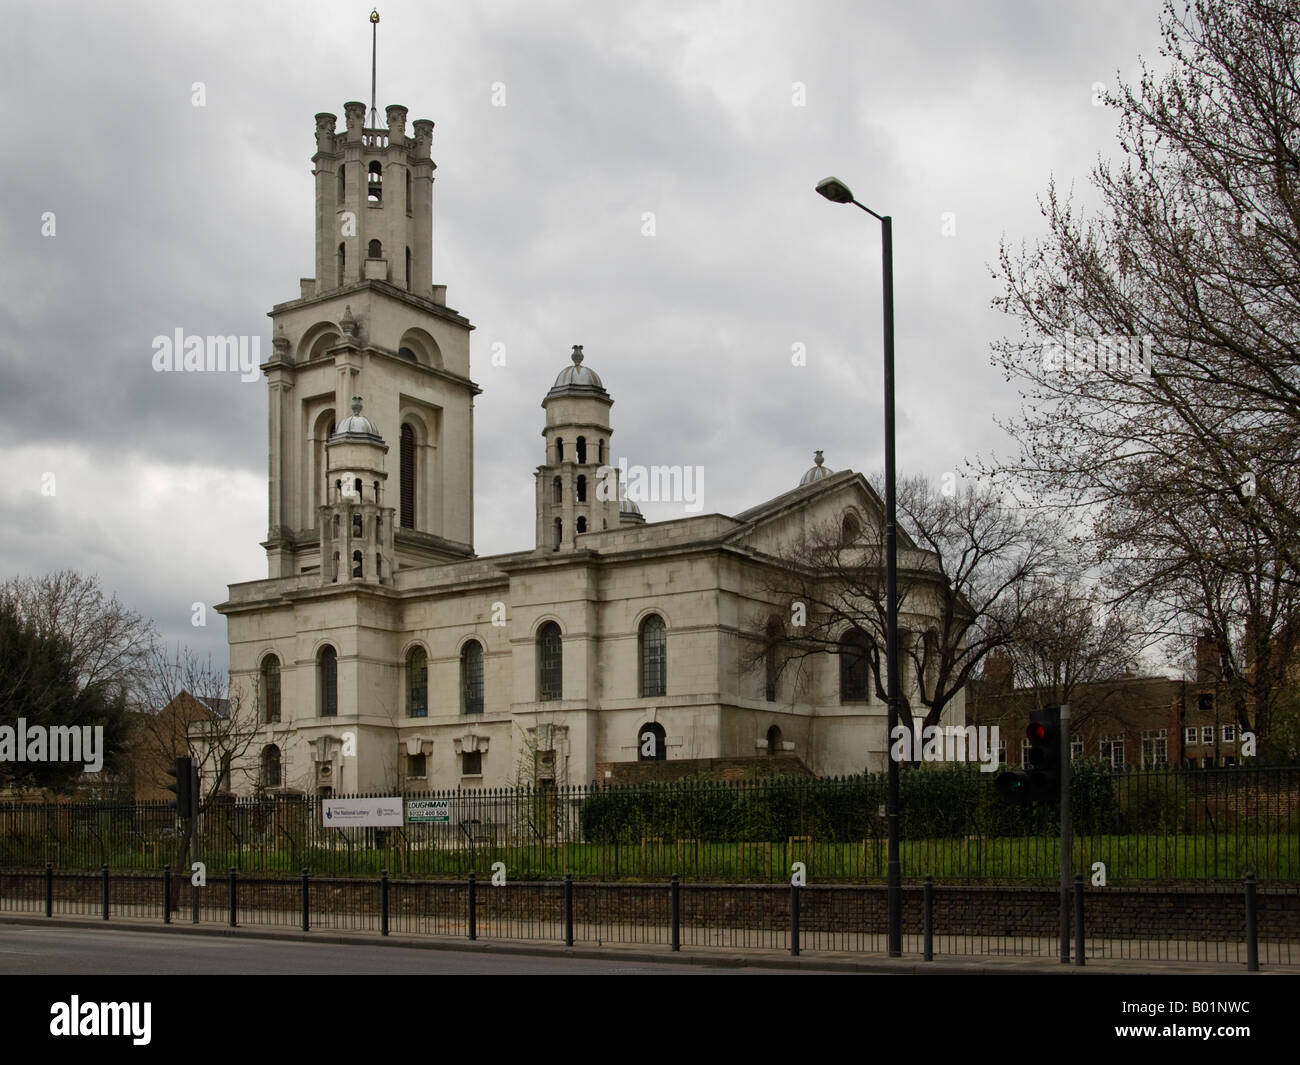 Church of St. George in the East, near Shadwell, London, England, UK.  Built 1719 - 1724 designed by Nicholas Hawksmoor Stock Photo